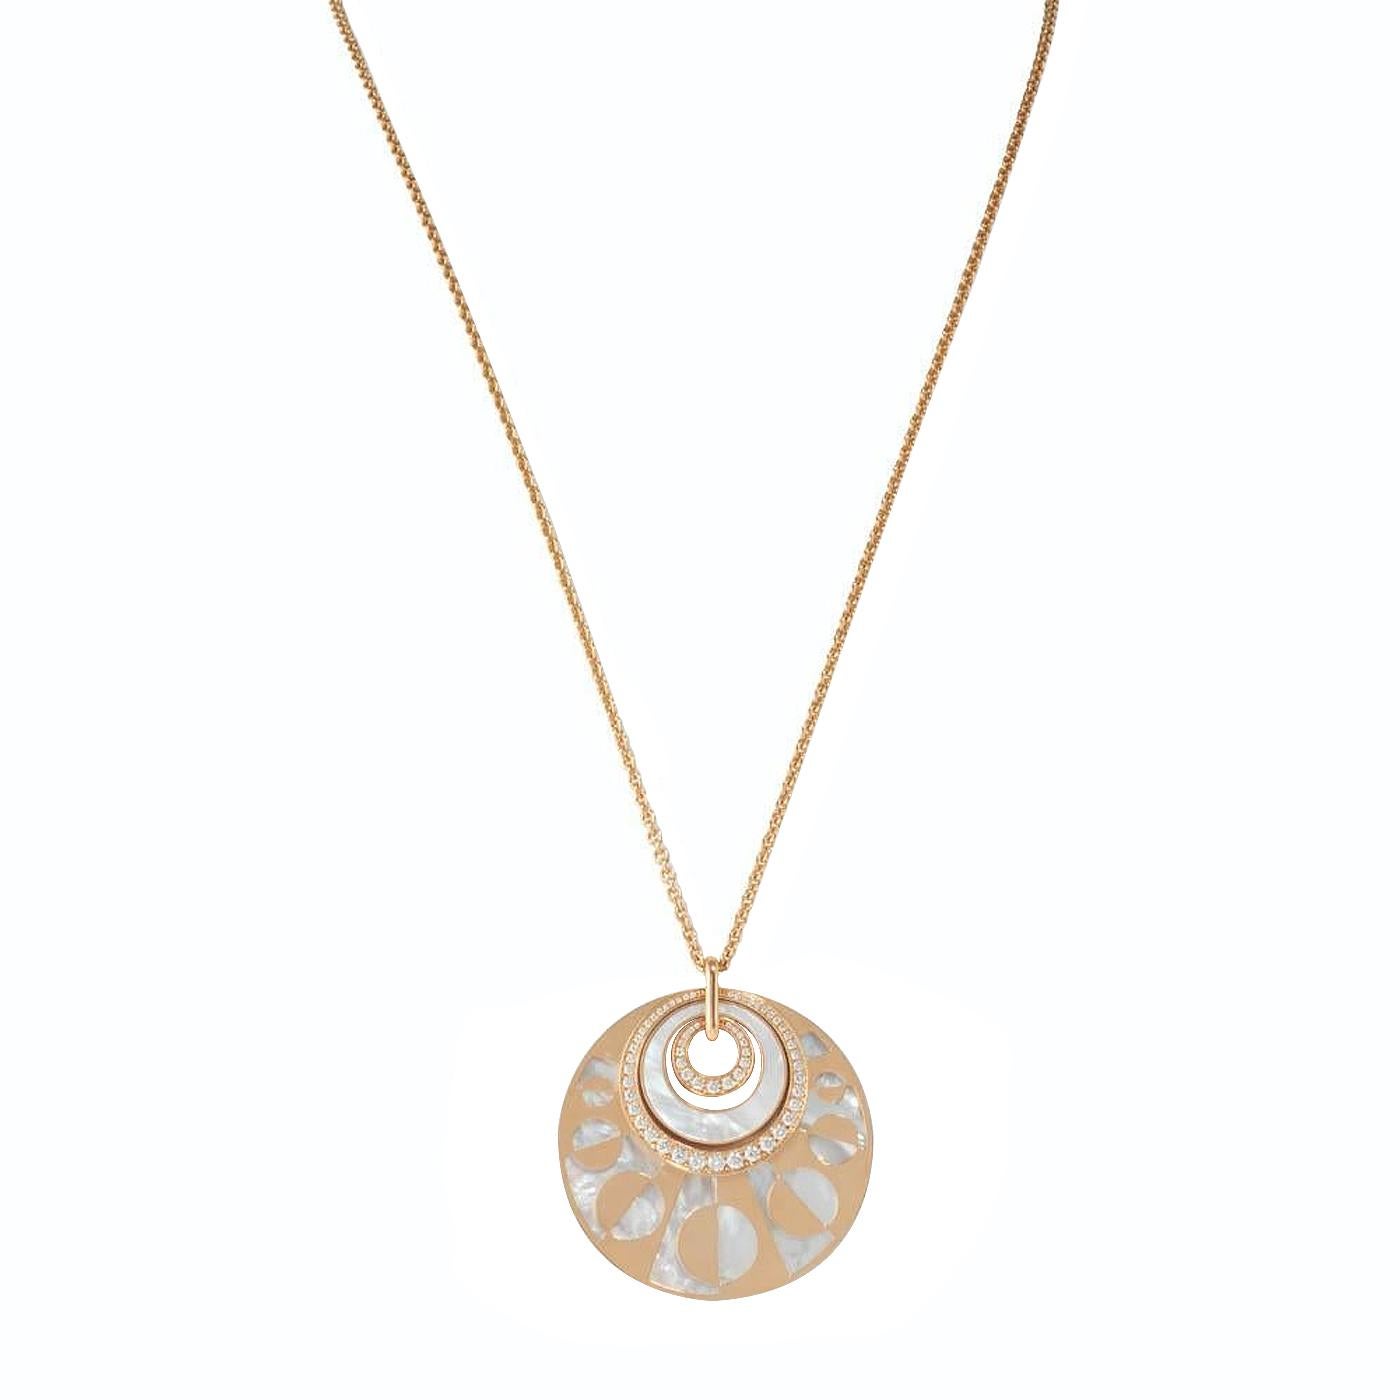 BVLGARI 18k Rose Gold Diamond and Mother of Pearl Pendant Necklace, Authentic Bvlgari 'Intarsio' CIRCA 2010s Diamond and Mother of Pearl Pendant Necklace crafted in 18k Rose Gold. The center on round mother-of-pearl inlaid geometric motifs set with